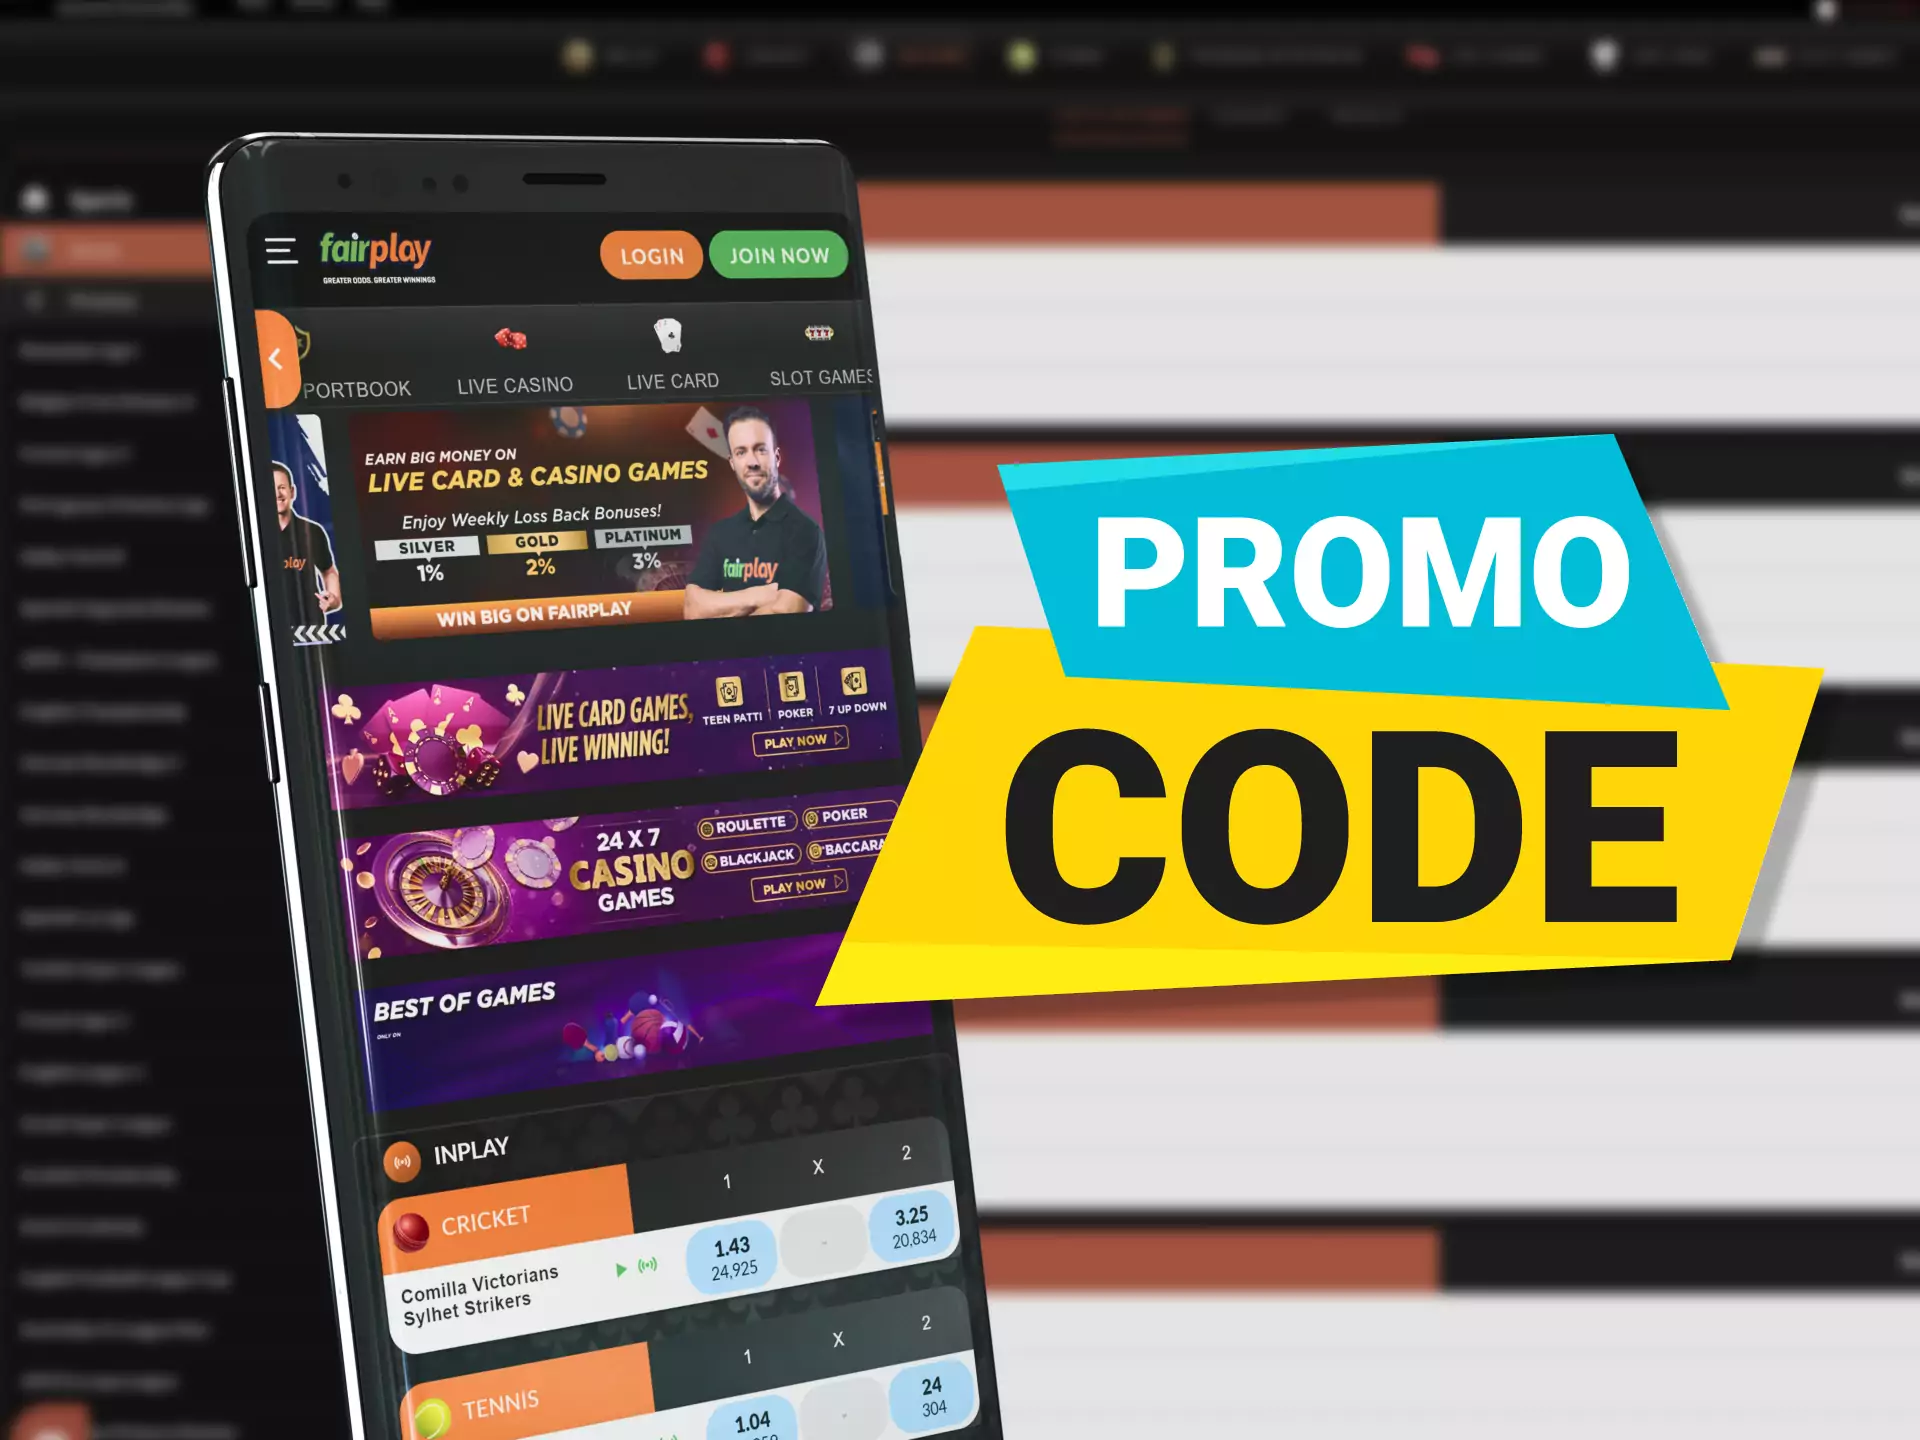 Use a special promo code to get bonuses in the Fairplay app.